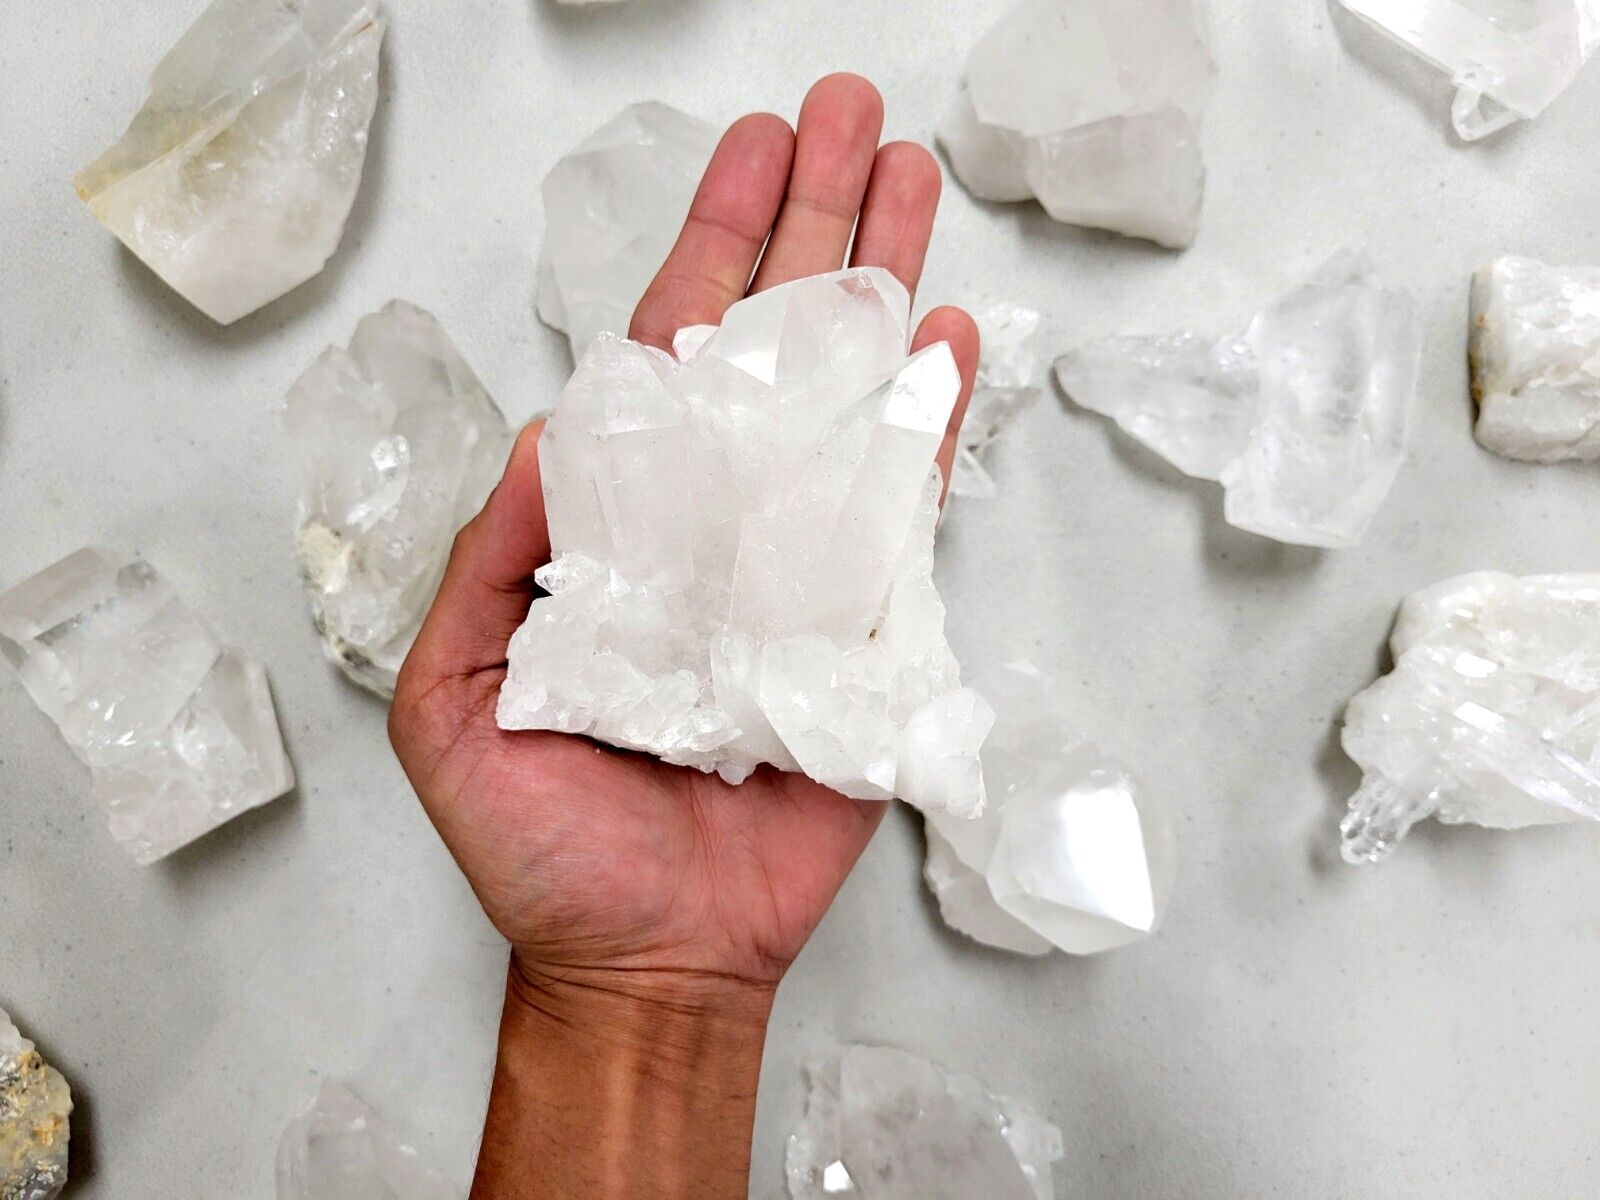 Large Natural Clear Quartz Crystal Clusters Big Rocks for Healing and Display